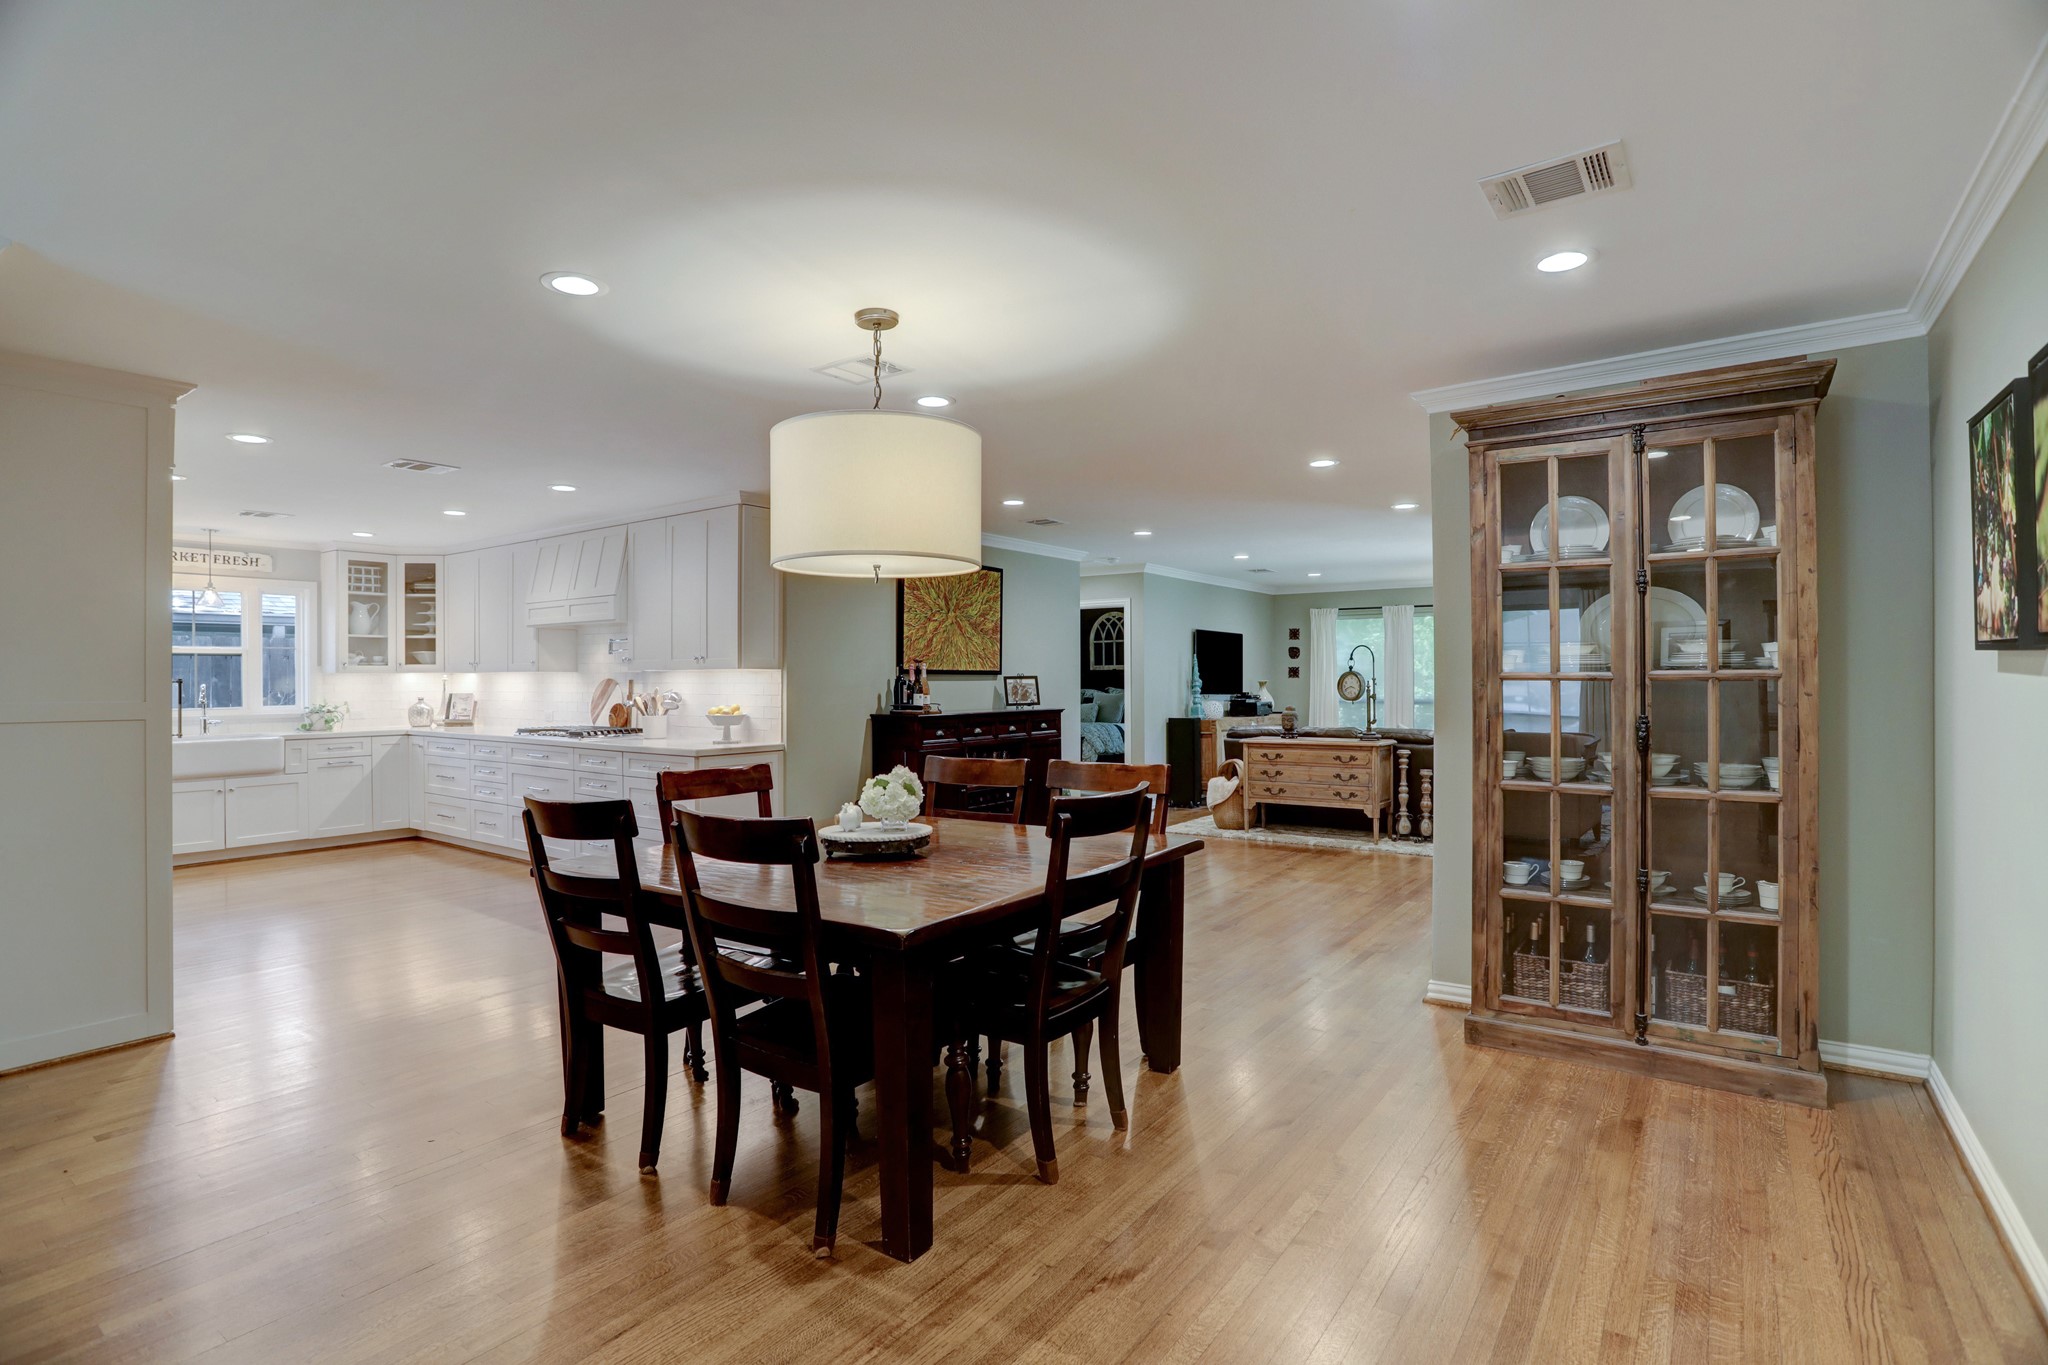 Great open concept from living to dining to kitchen.